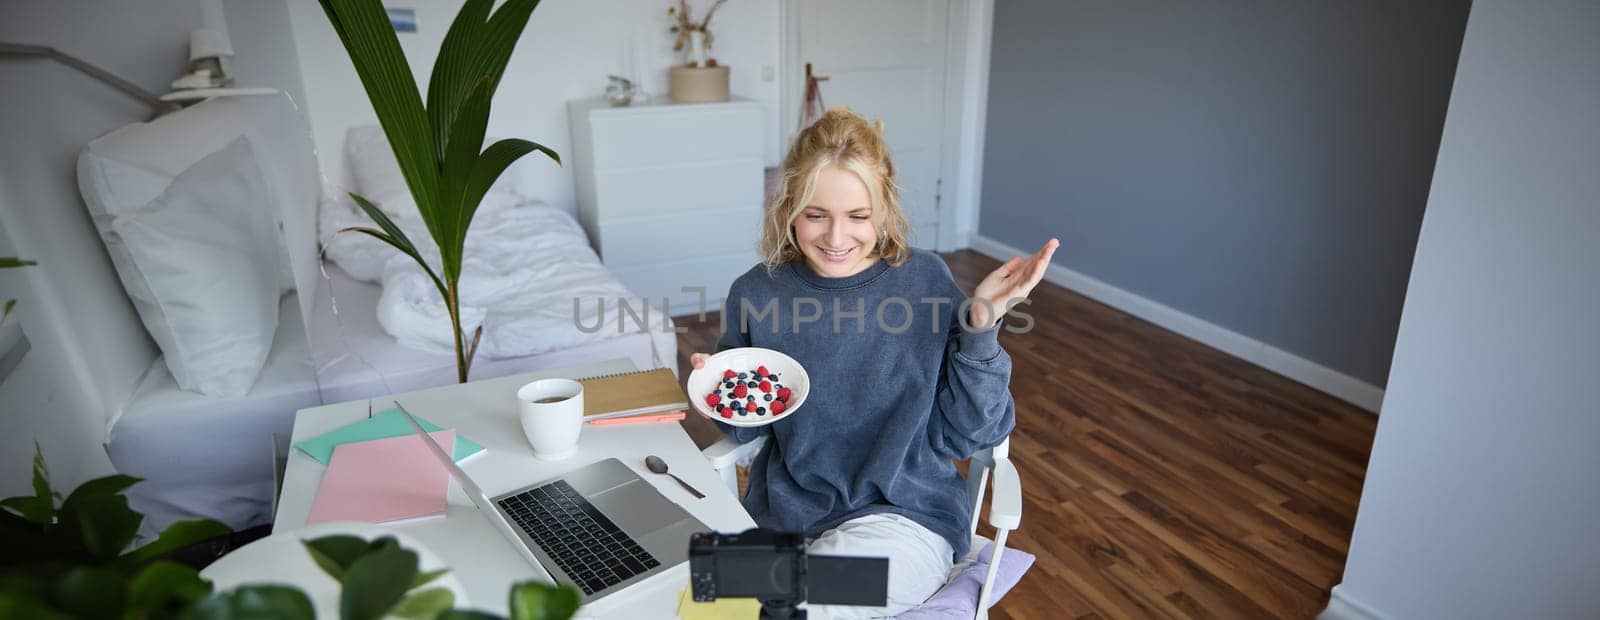 Portrait of young woman talking to audience, recording vlog on digital camera, showing her breakfast, talking about healthy food and lifestyle.